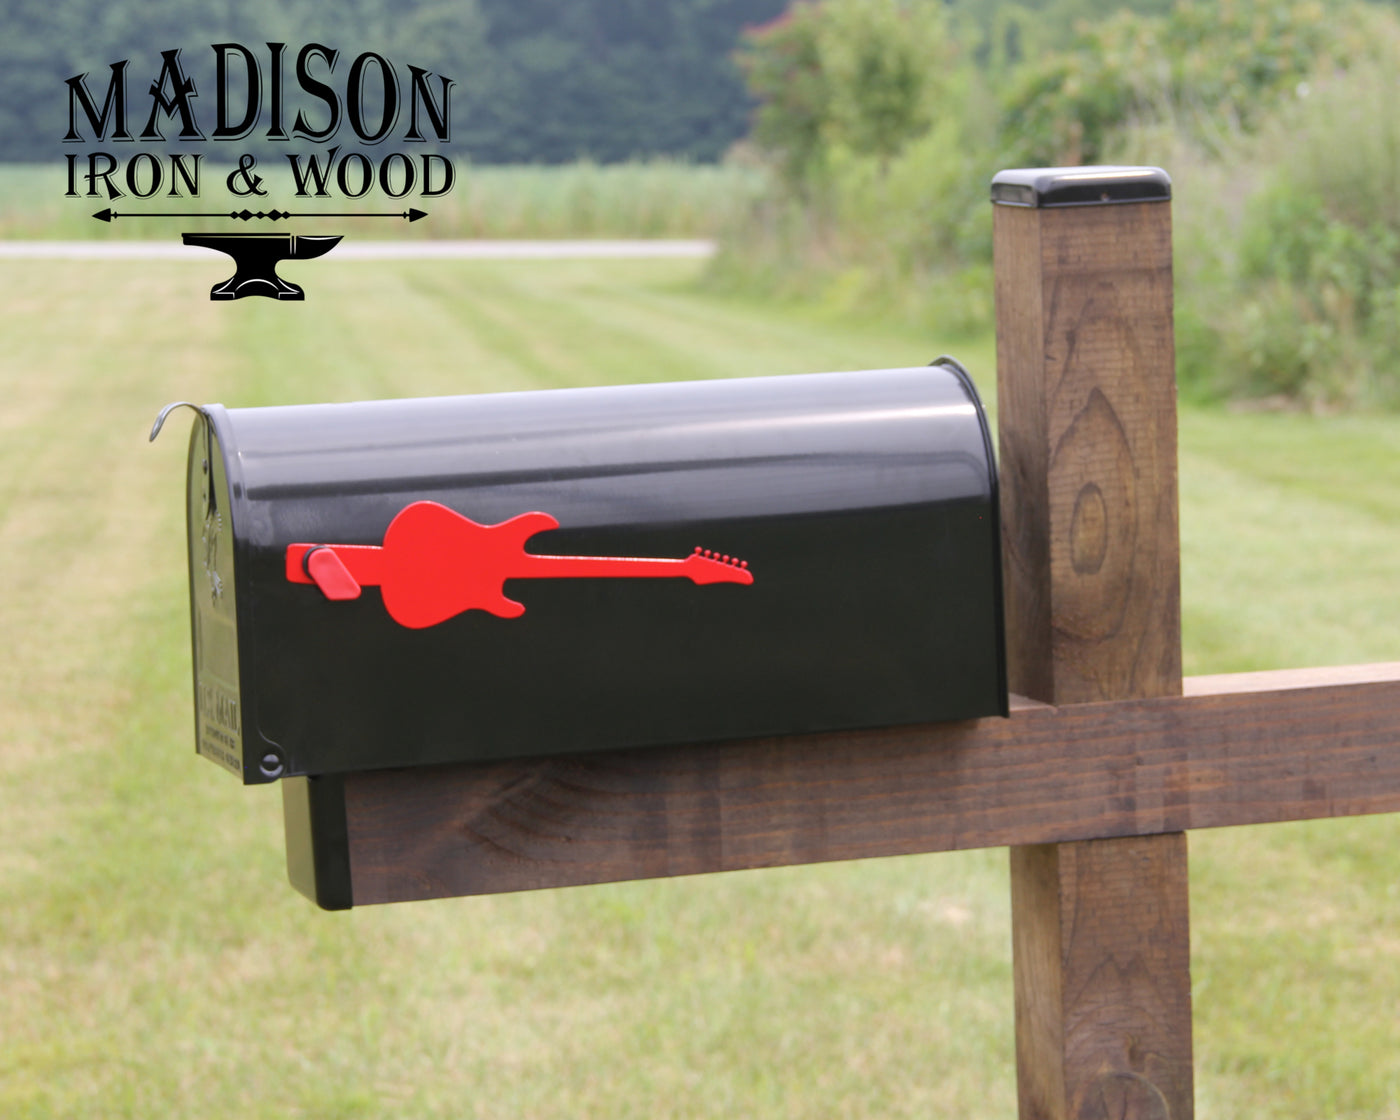 Electric Guitar Mailbox Flag - Madison Iron and Wood - Mailbox Post Decor - metal outdoor decor - Steel deocrations - american made products - veteran owned business products - fencing decorations - fencing supplies - custom wall decorations - personalized wall signs - steel - decorative post caps - steel post caps - metal post caps - brackets - structural brackets - home improvement - easter - easter decorations - easter gift - easter yard decor